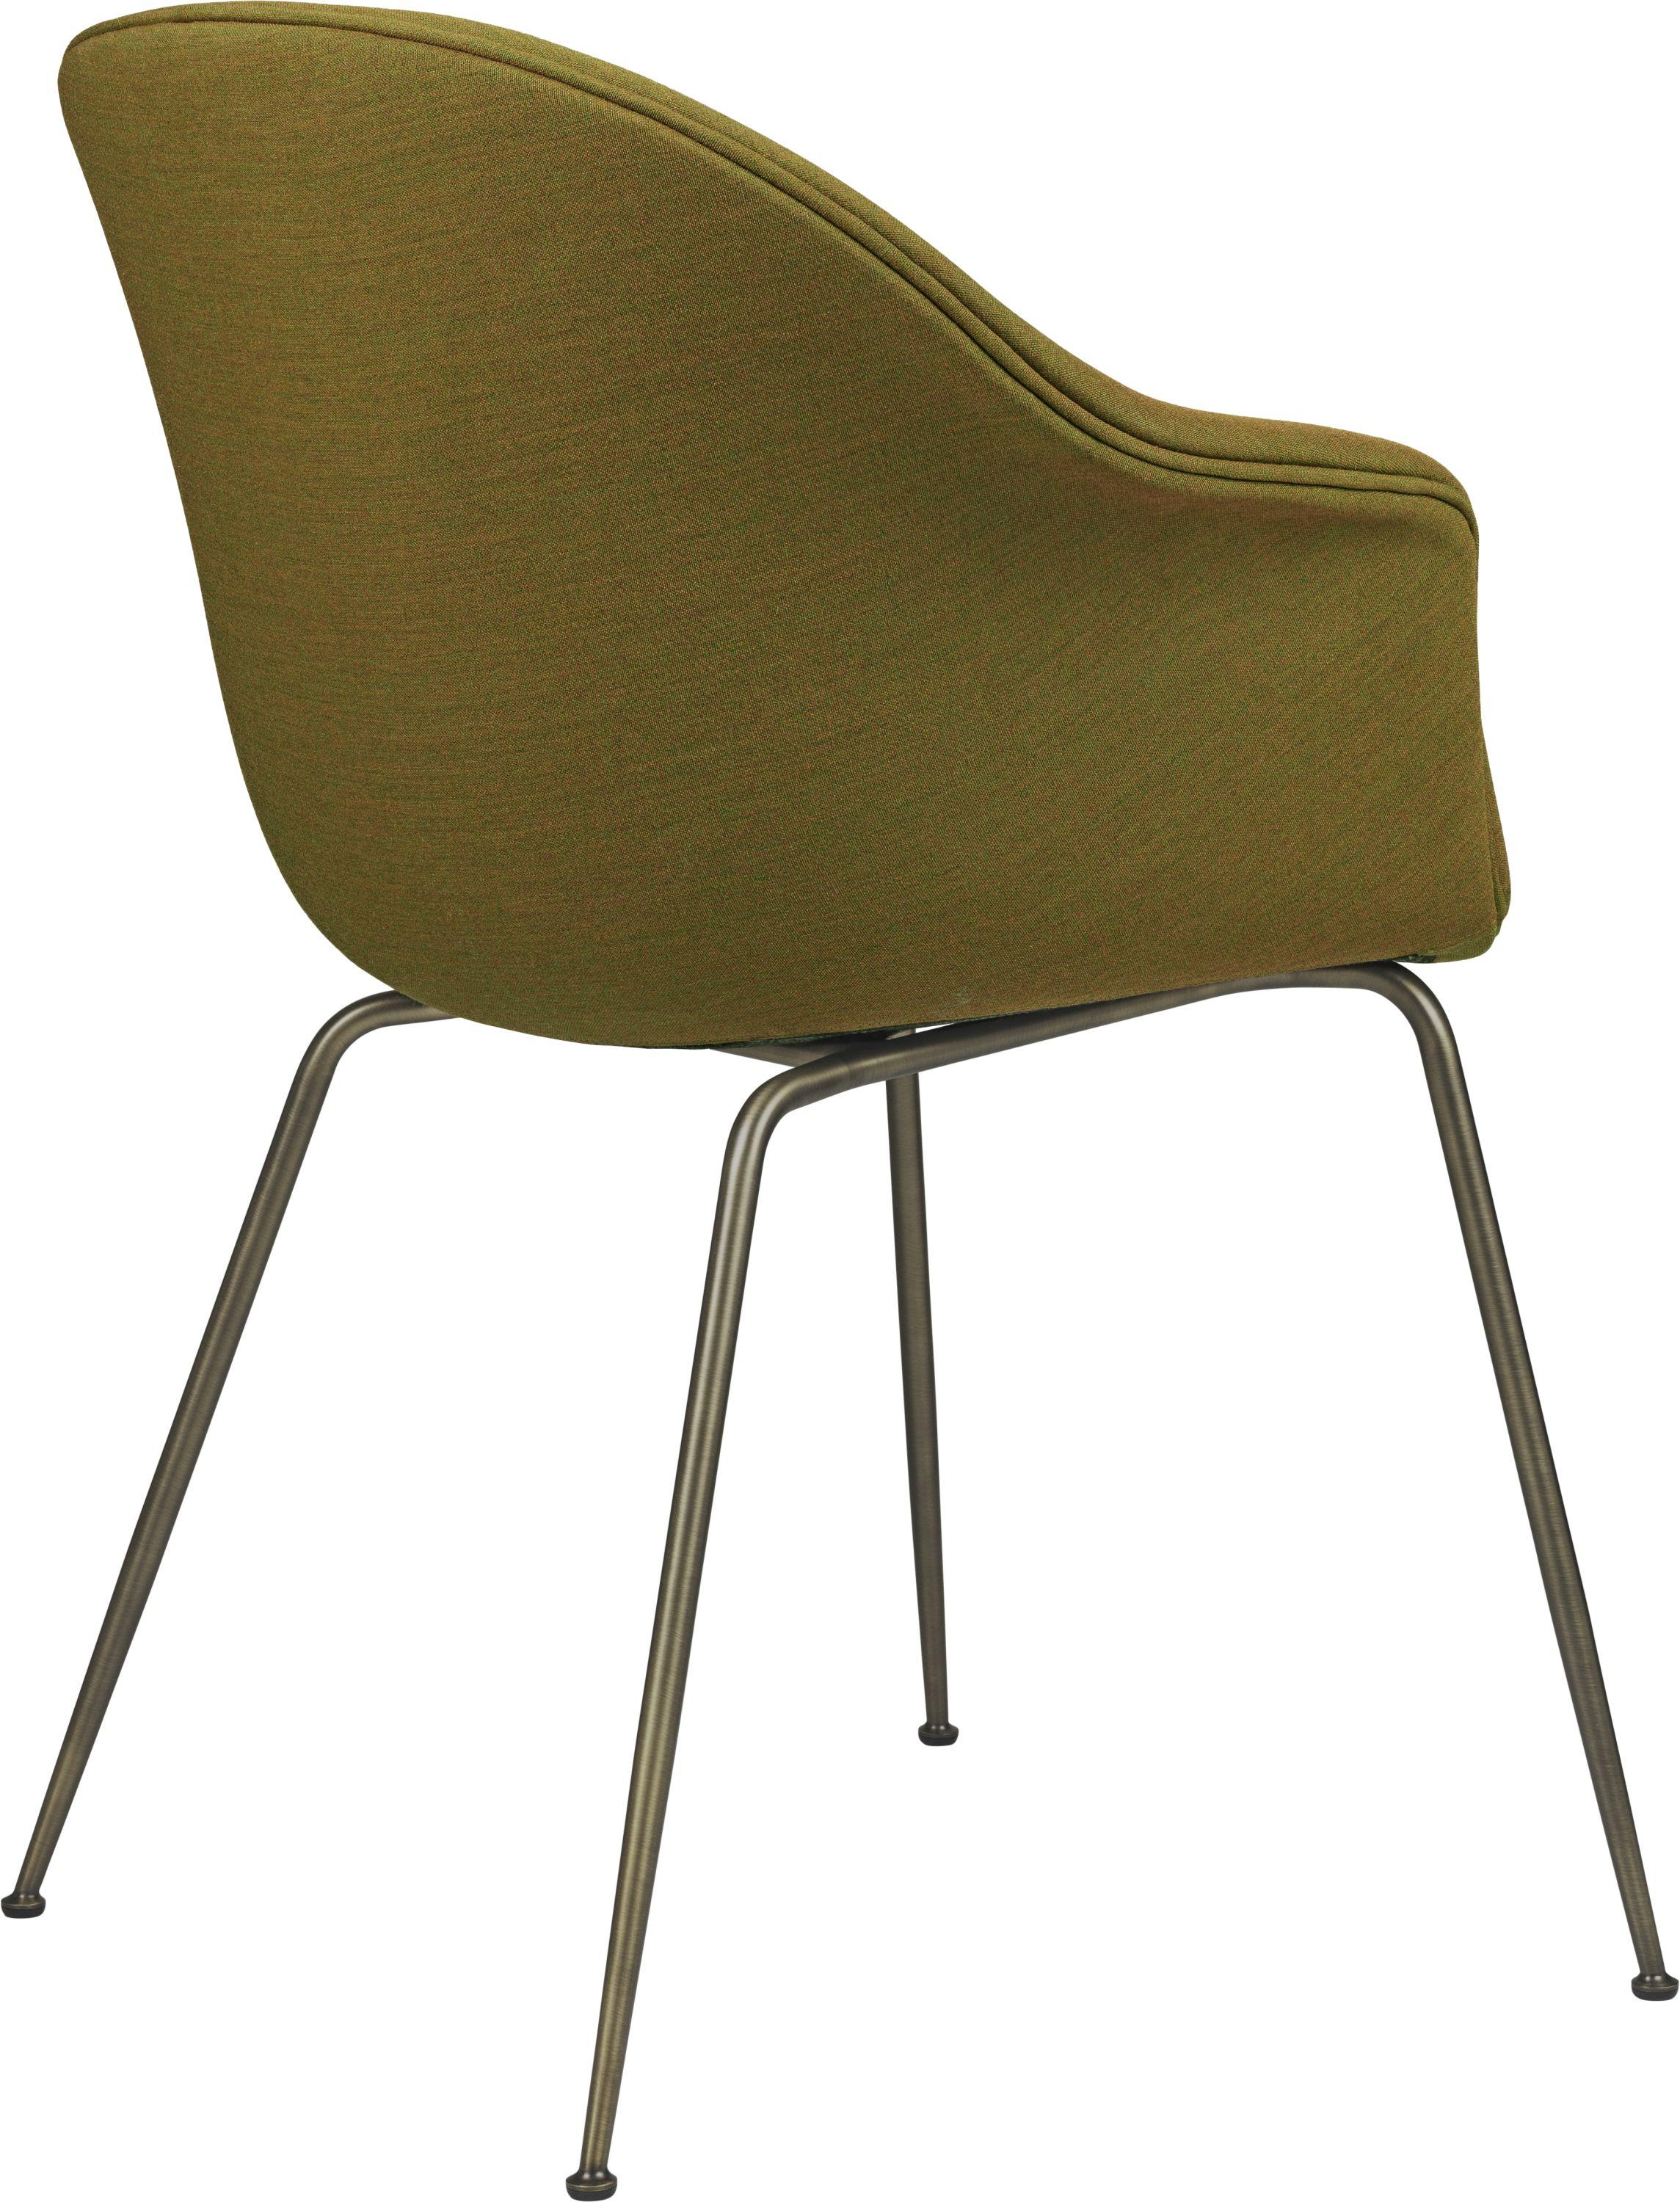 GamFratesi 'Bat' dining chair in green with antique brass conic base. Designed by Danish-Italian design-duo GamFratesi in 2018, the Bat dining chair is created with a Scandinavian approach to crafts, simplicity, and functionalism. Executed in metal